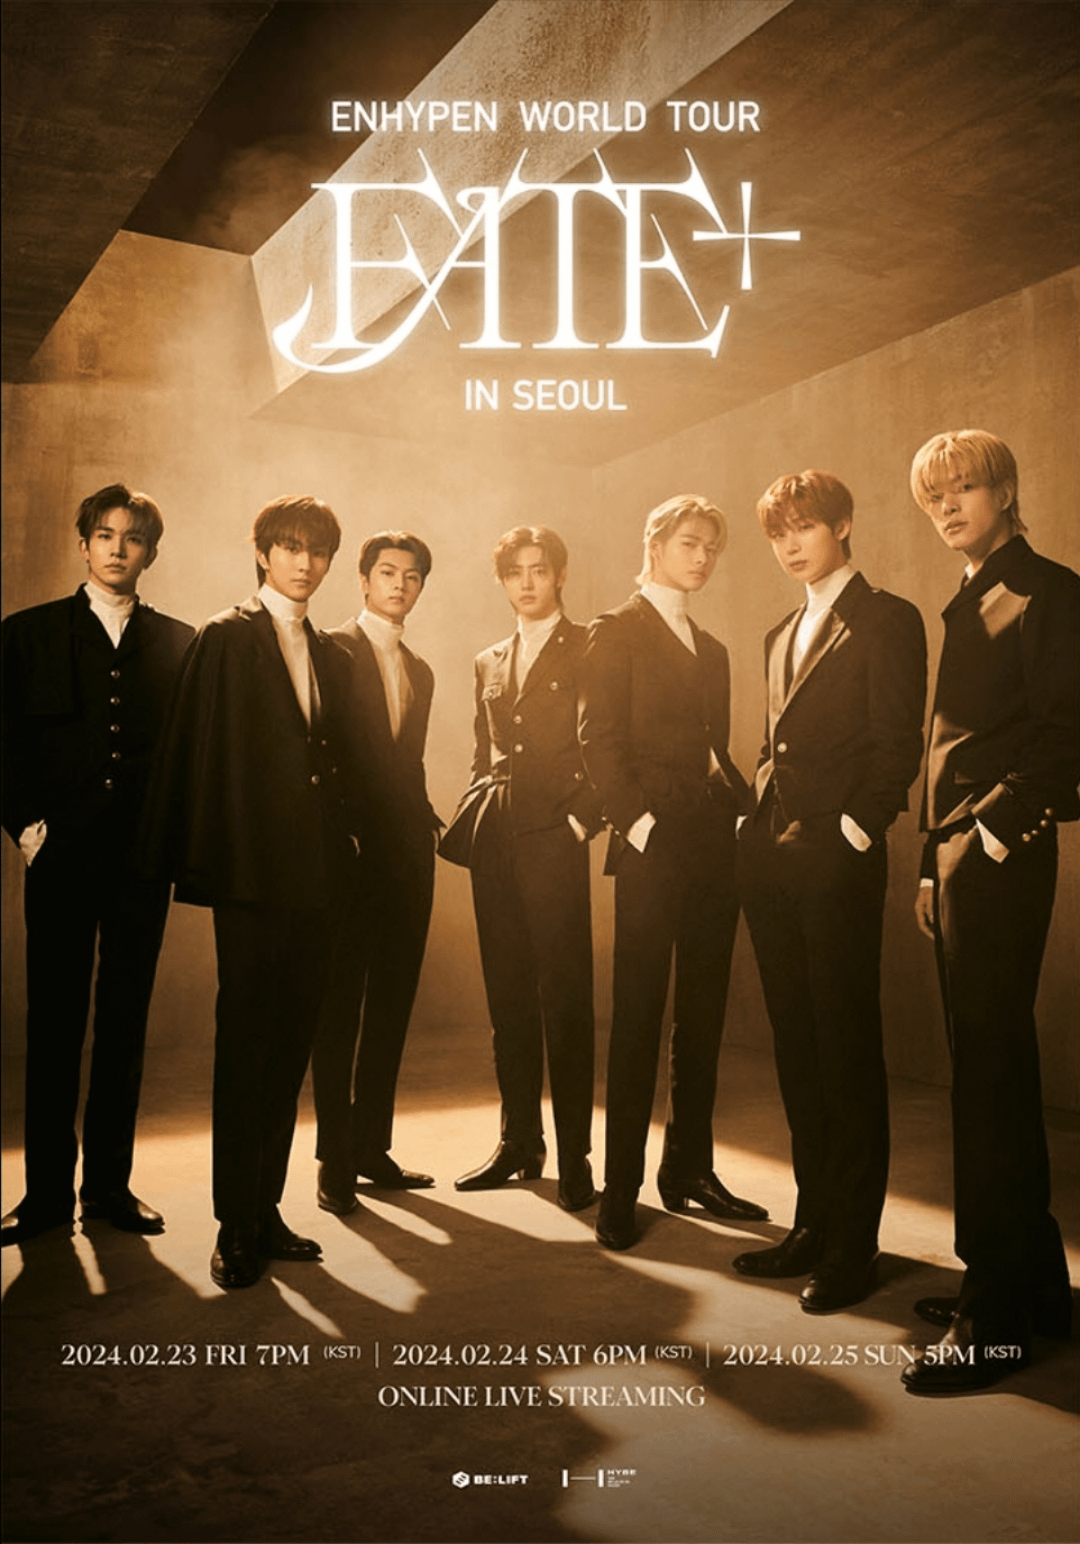 240213 ENHYPEN WORLD TOUR “FATE PLUS” IN SEOUL Online Live Streaming Ticket Information